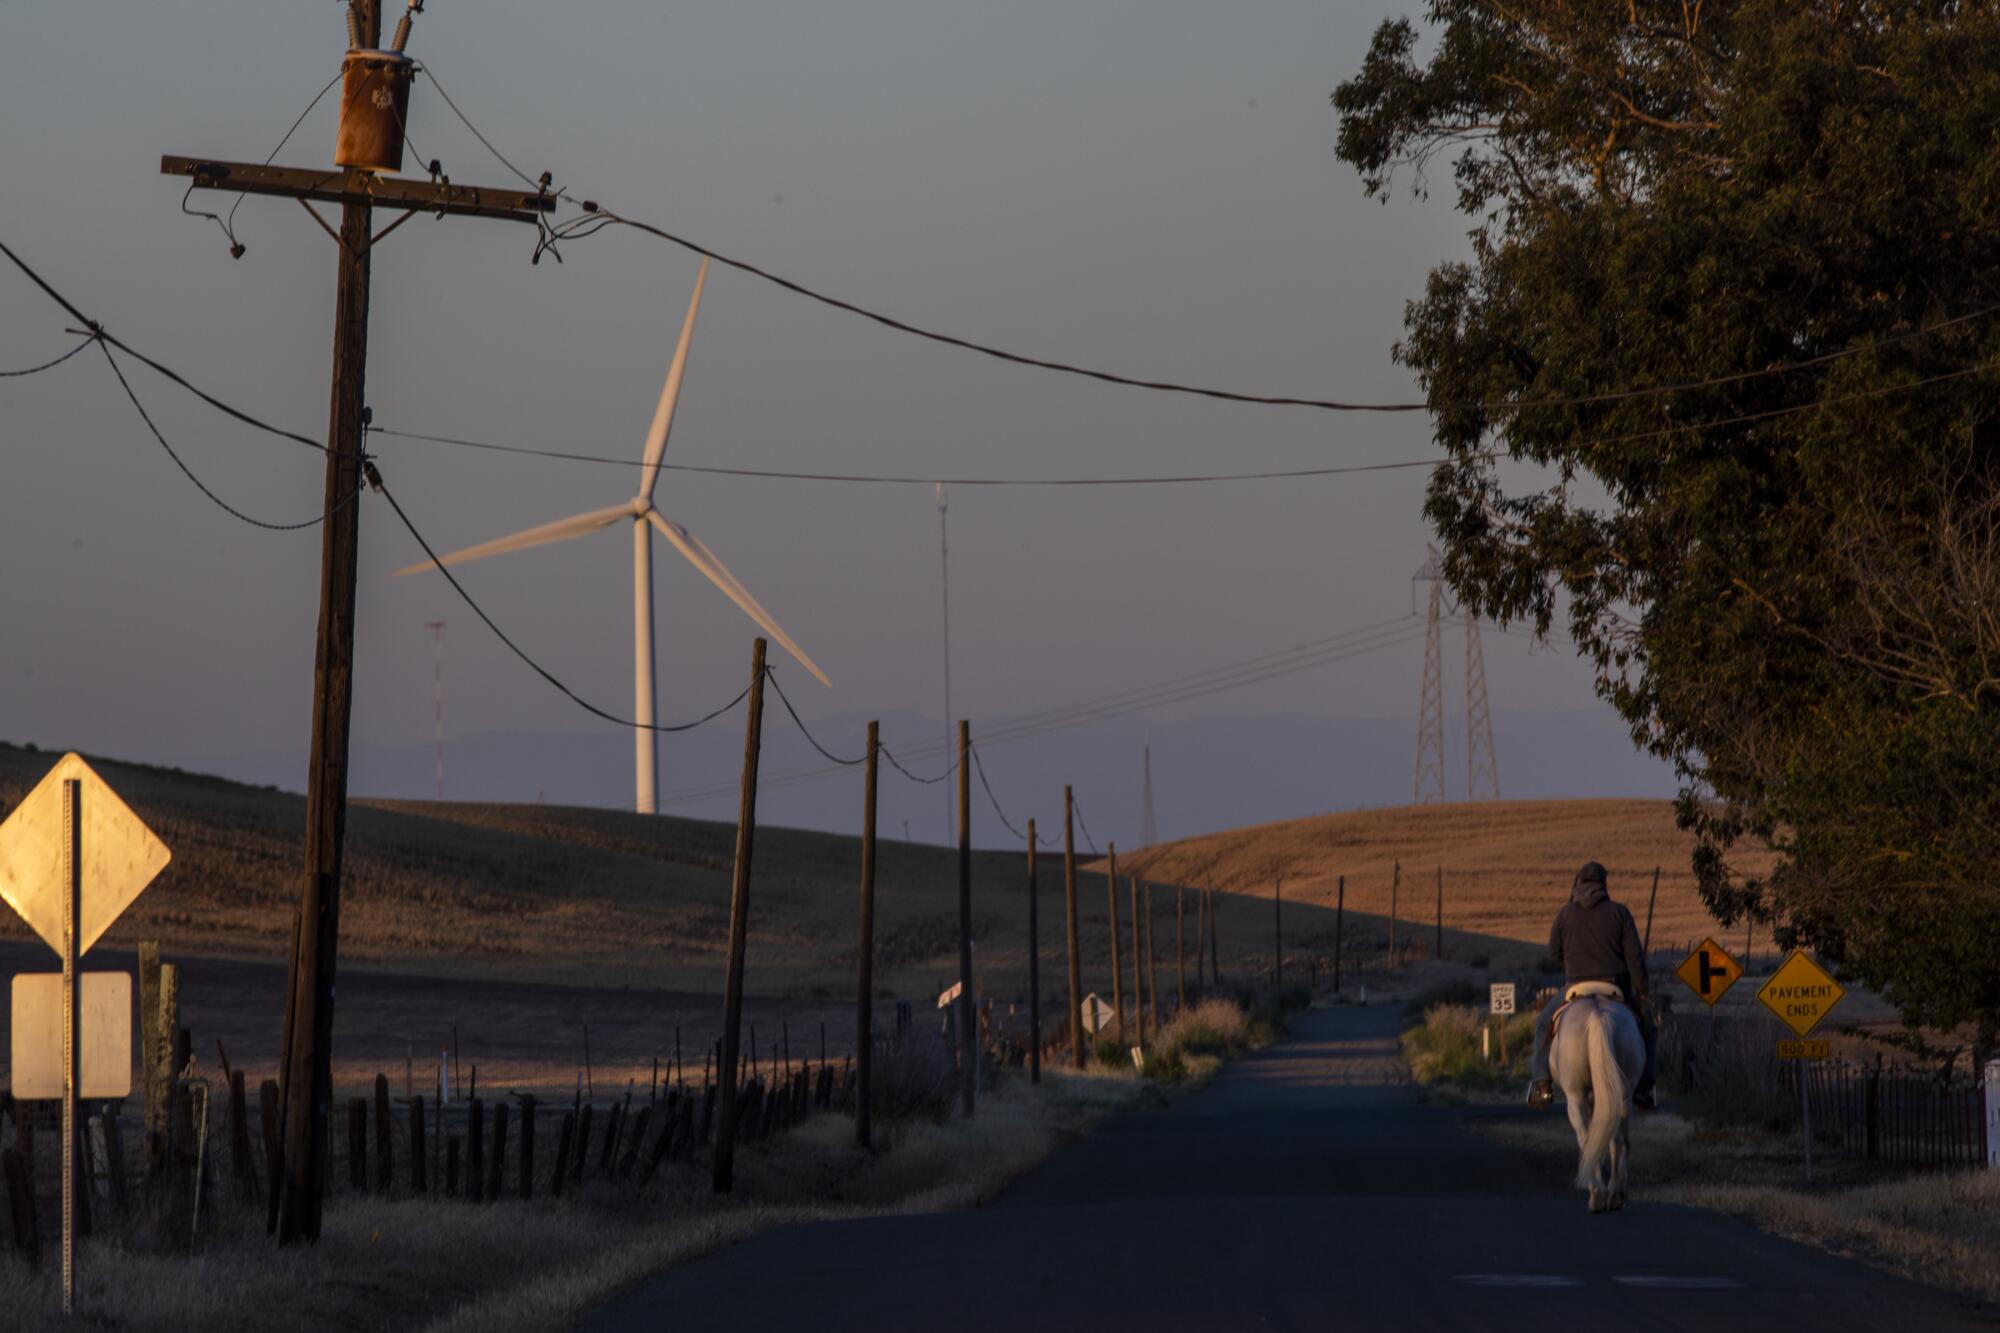 A person on a horse and a wind turbine far away.